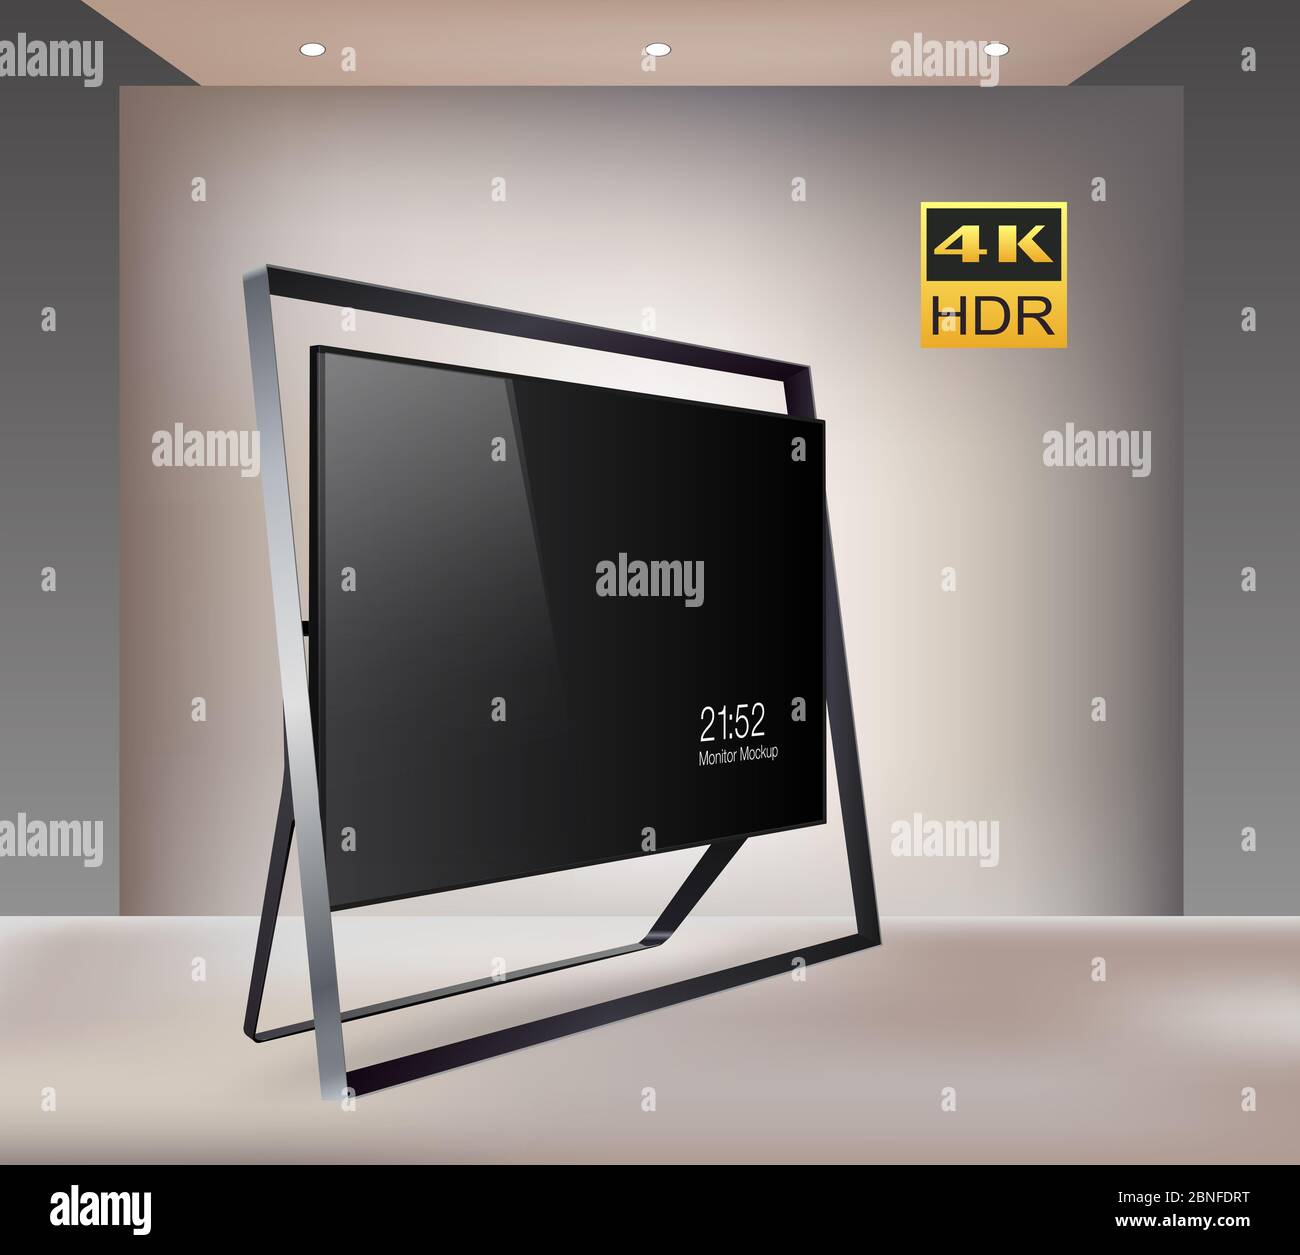 Next generation smart LED 4K TV in enlighten studio background, mock-up  series template ready for your design, selection path included Stock Photo  - Alamy